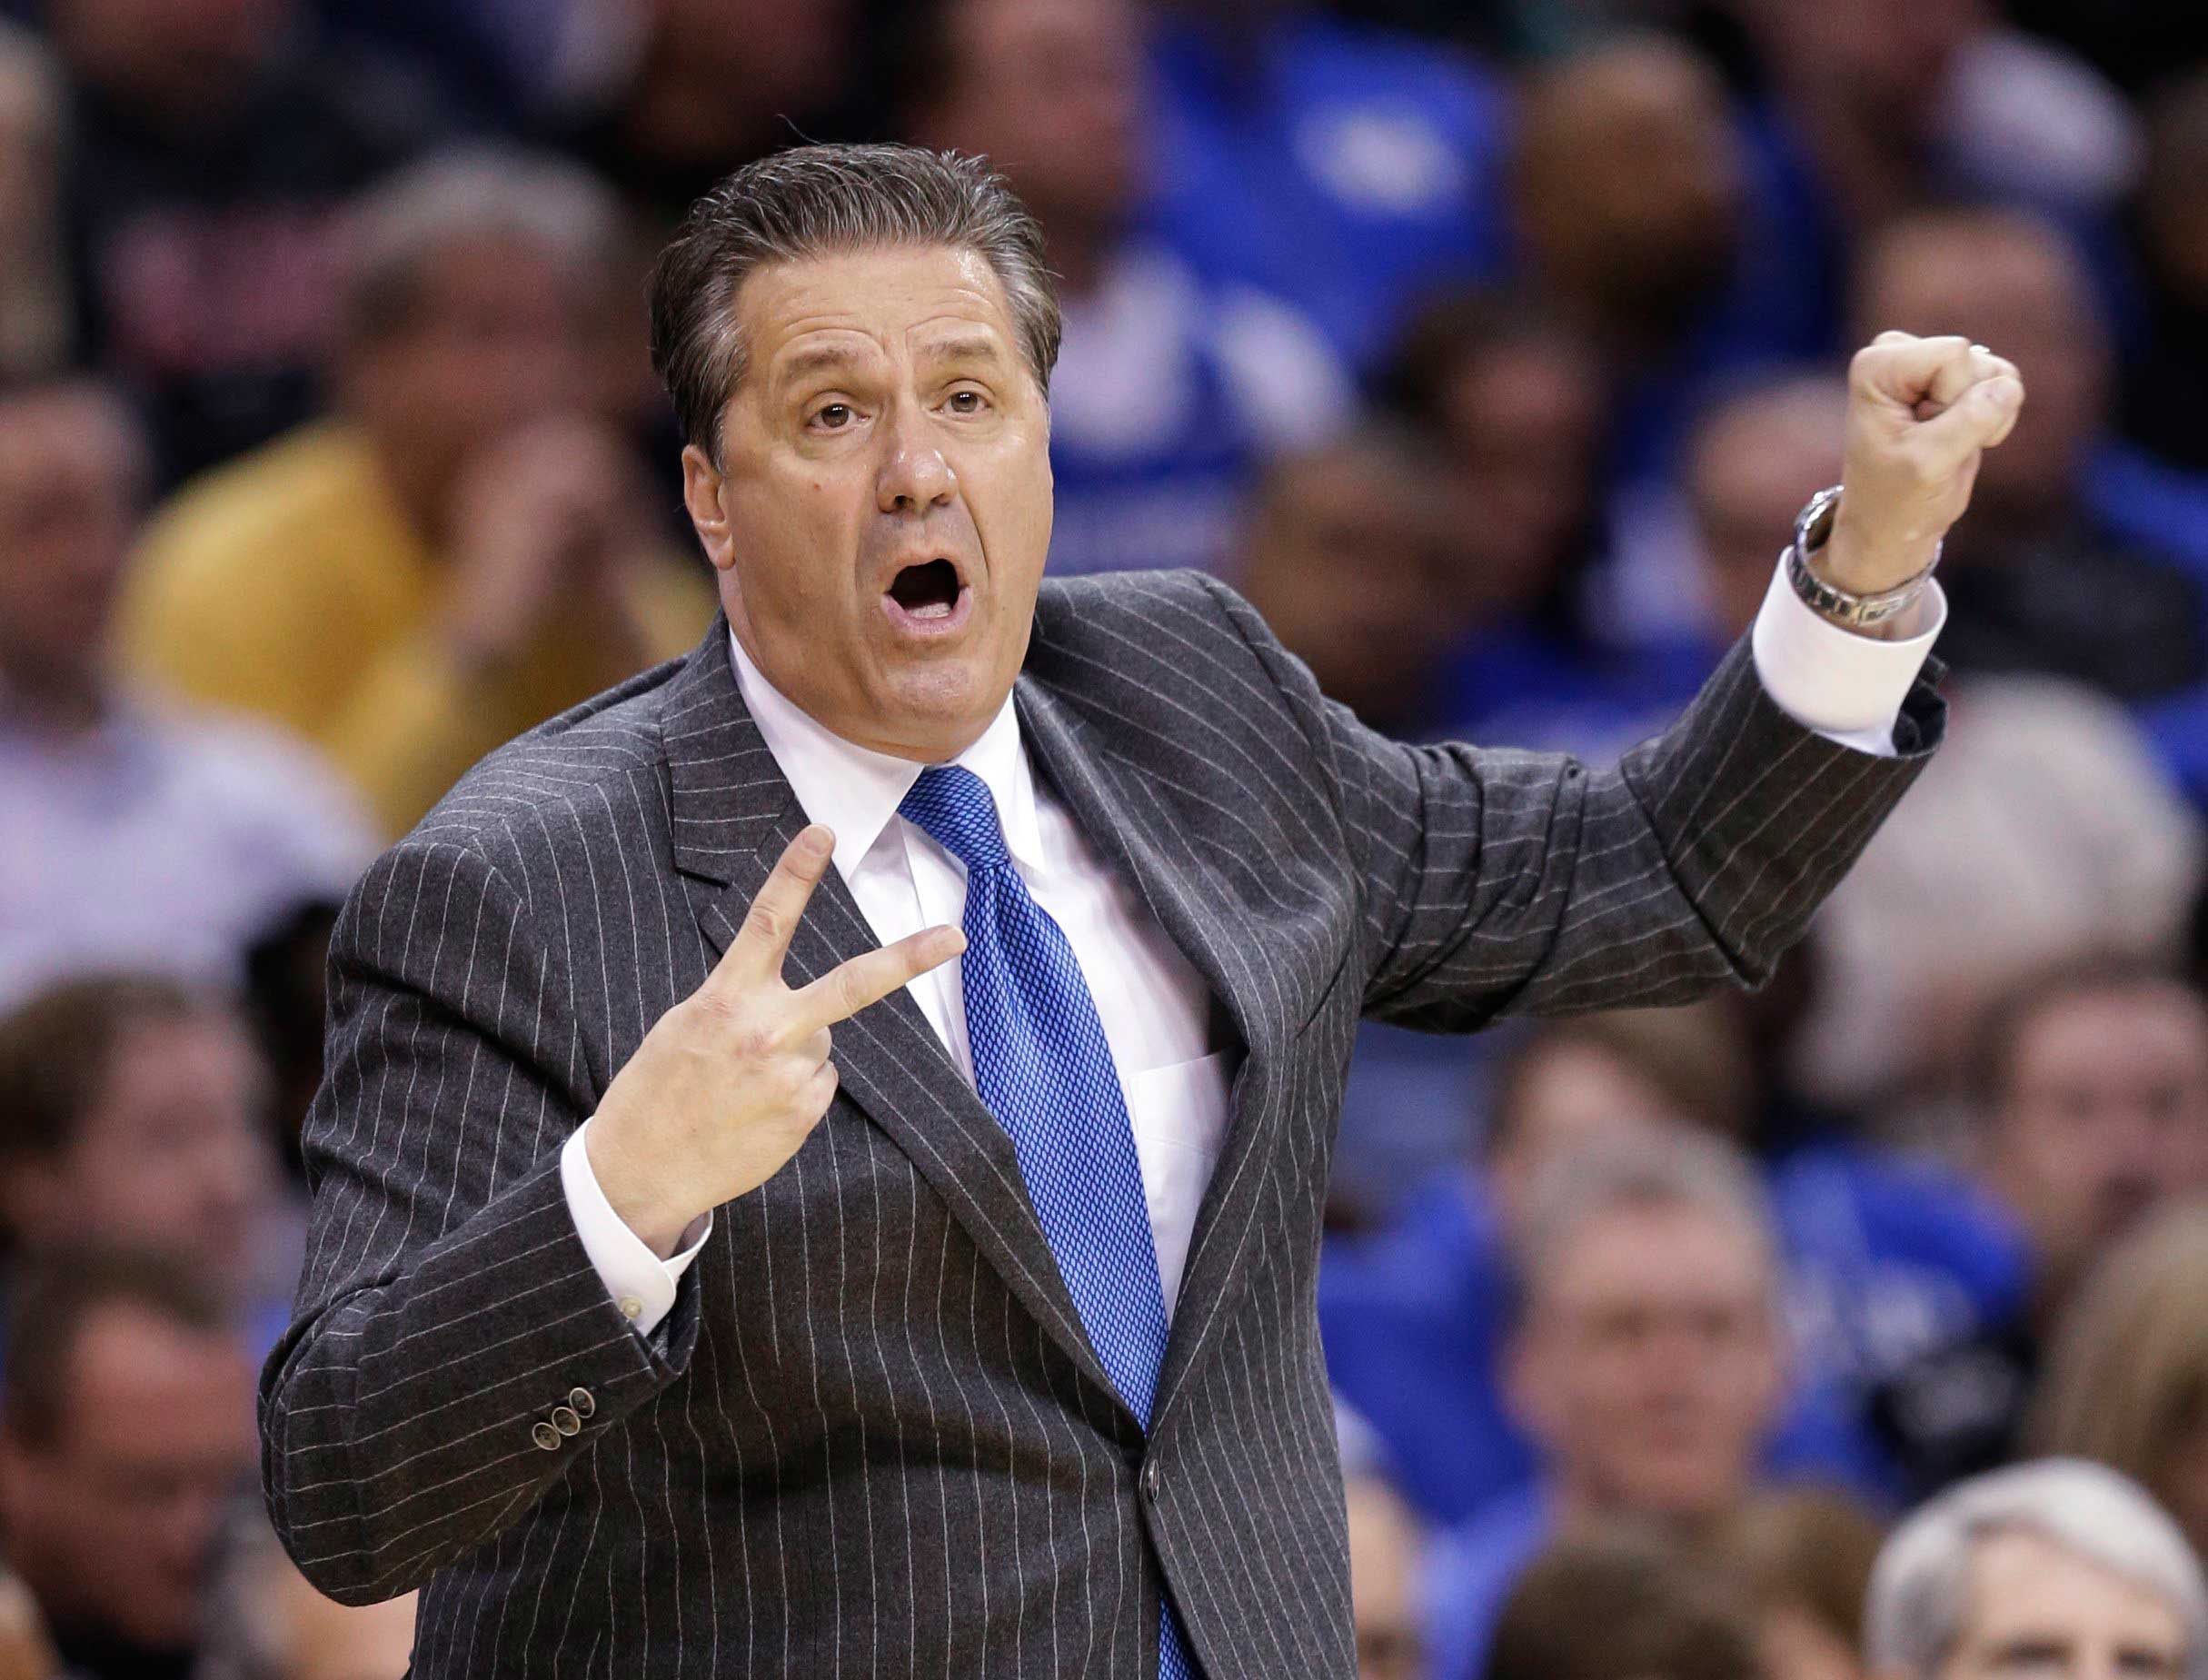 Kentucky coach John Calipari signals to his team during the first half of a college basketball game against Notre Dame in the NCAA men's tournament regional finals in Cleveland, March 28, 2015.